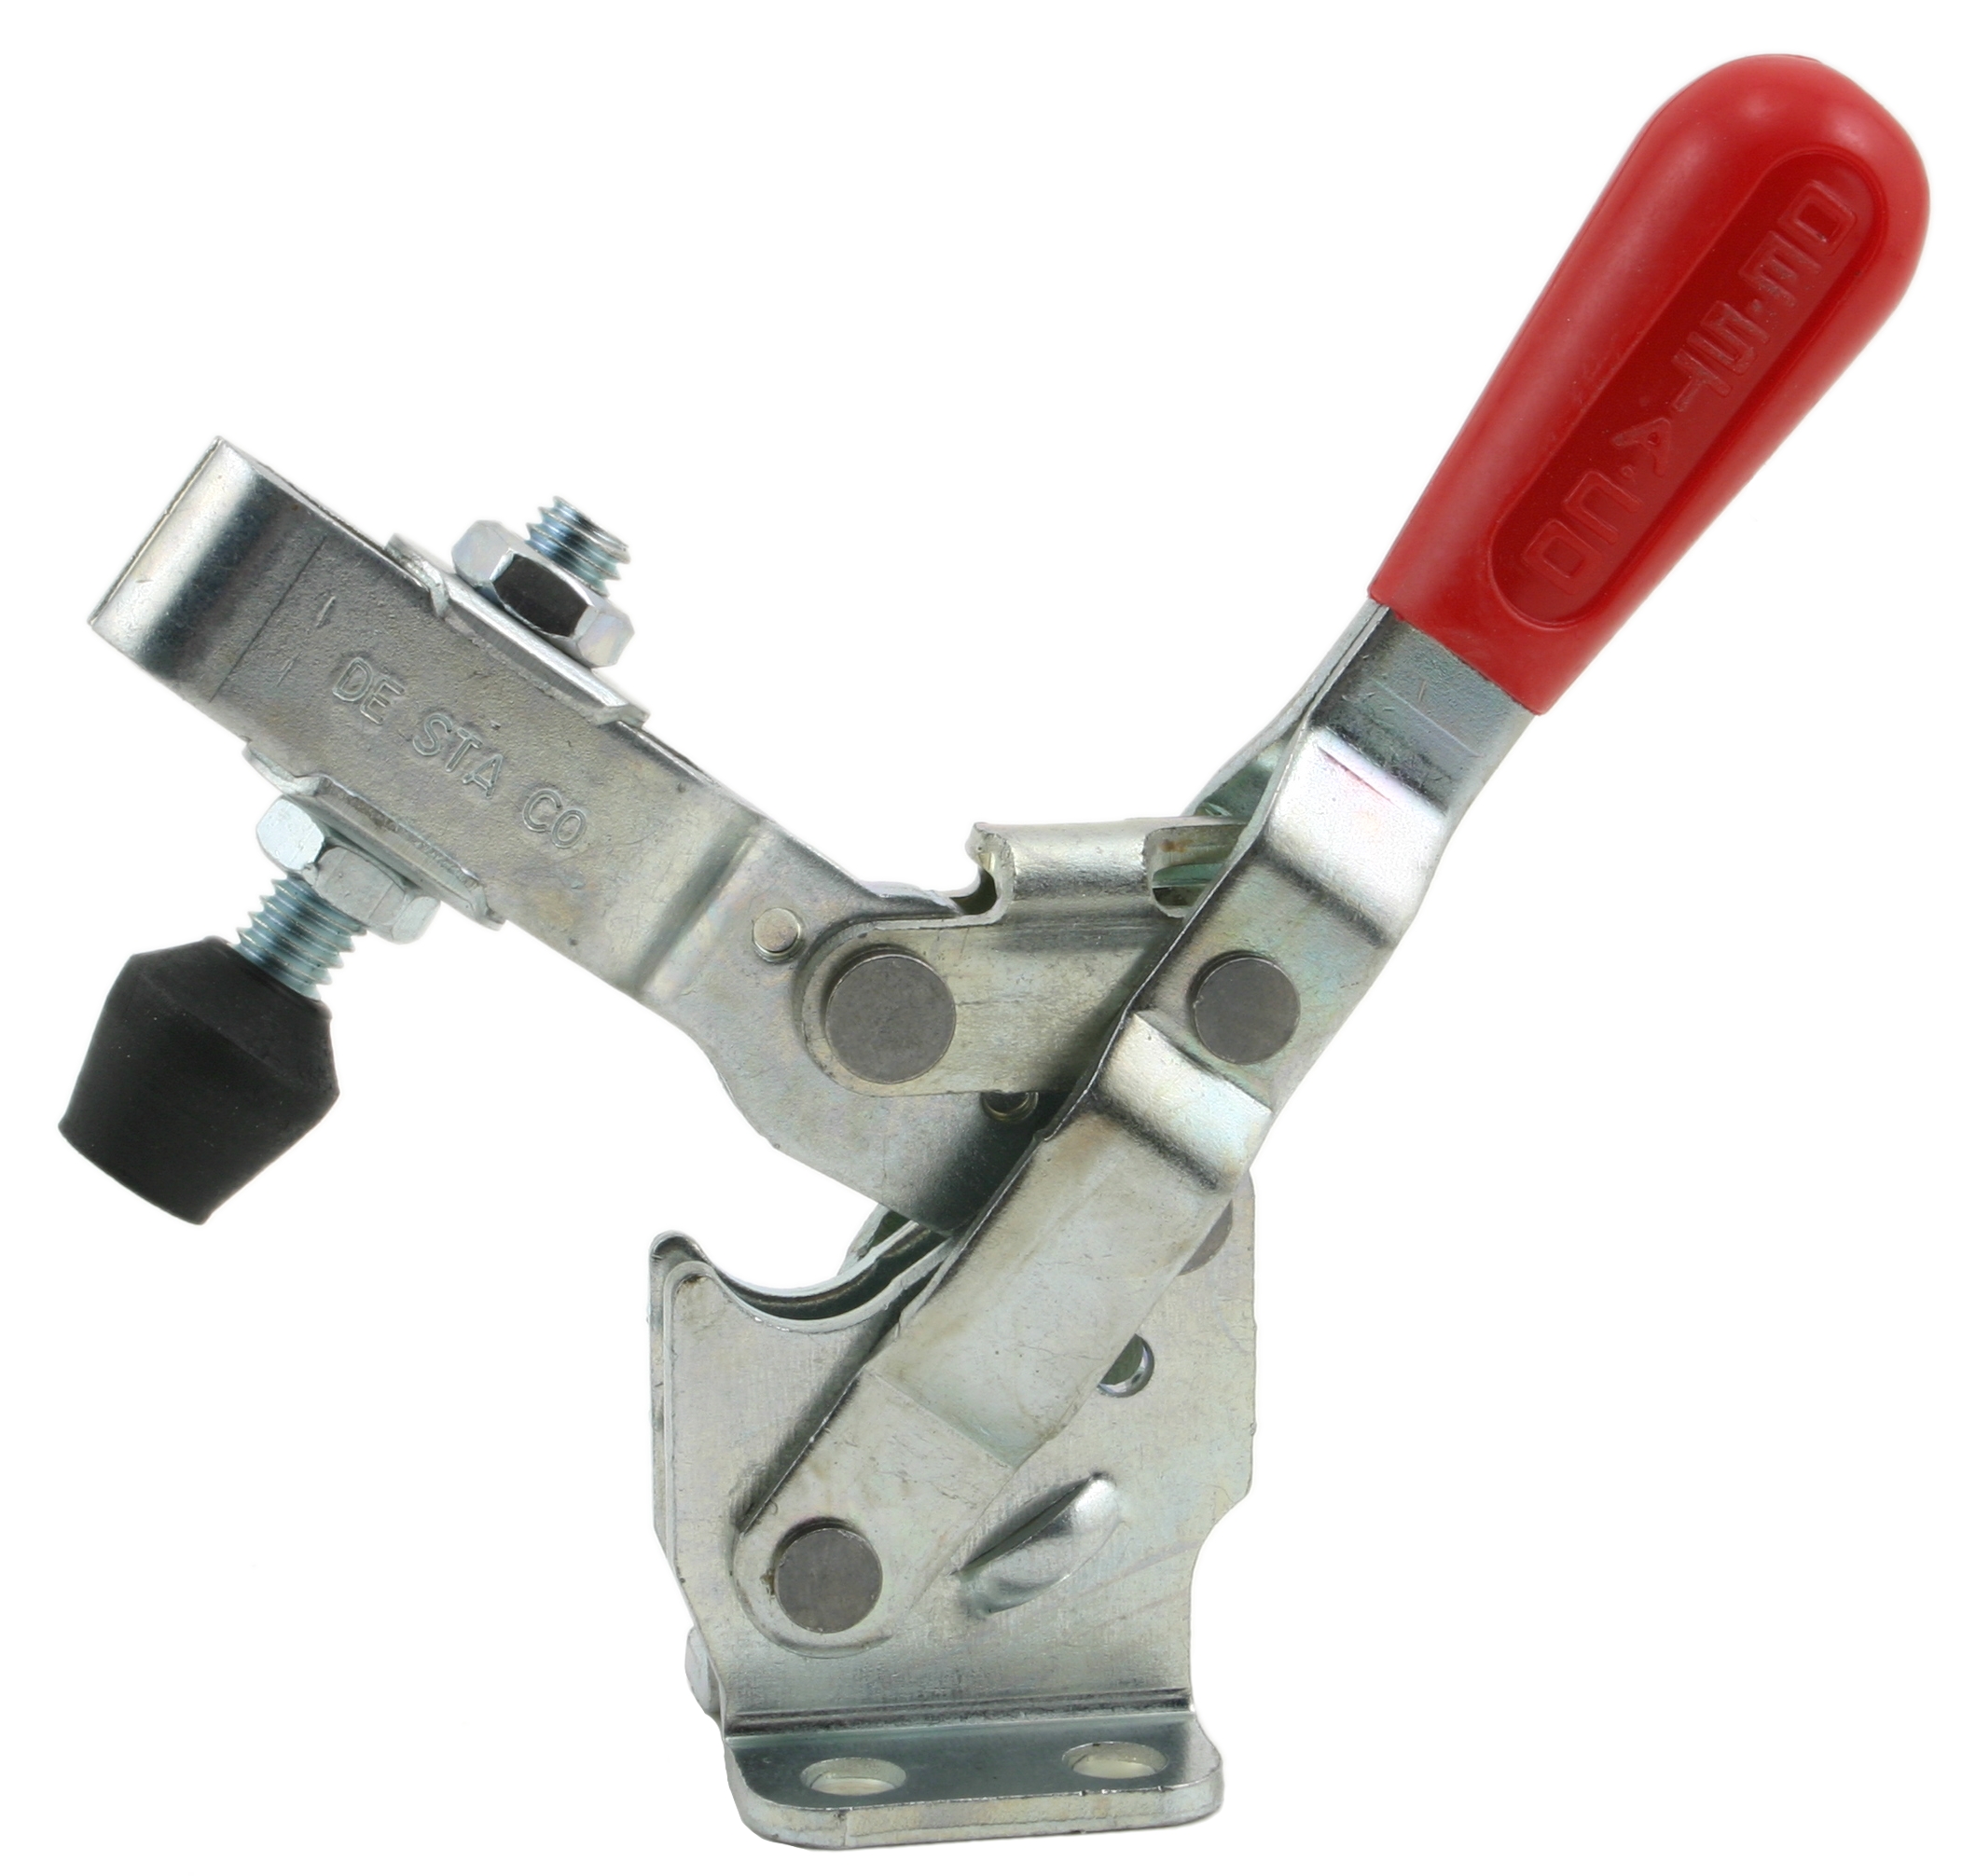 HOLD-DOWN CLAMP W SPINDLE 207-37 - Robert Larson Company